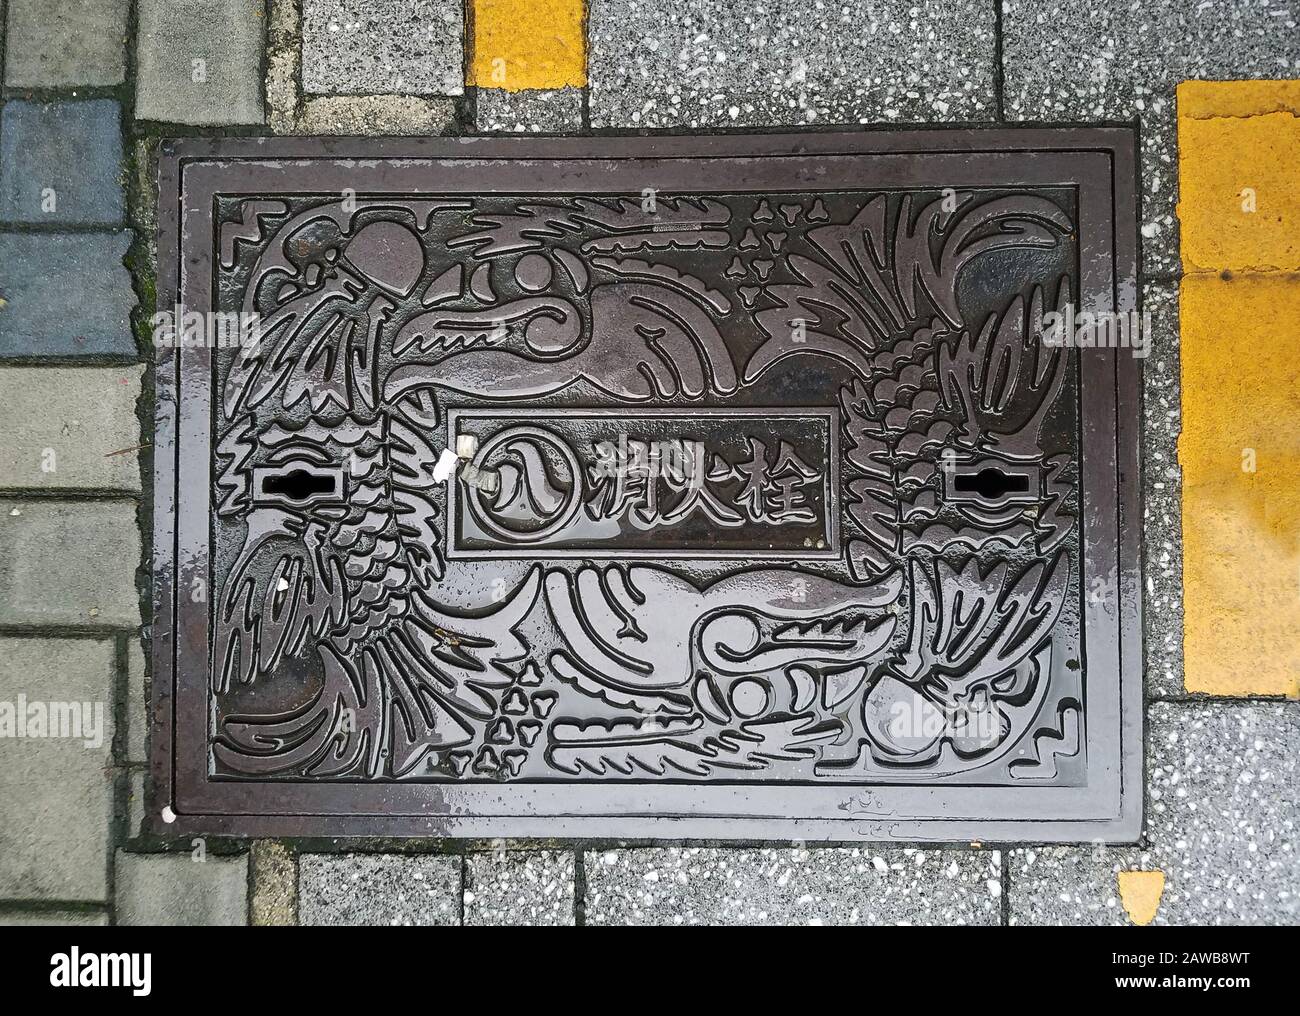 it's a photo of drain cover or manhole cover on the ground in the street or pavement Stock Photo